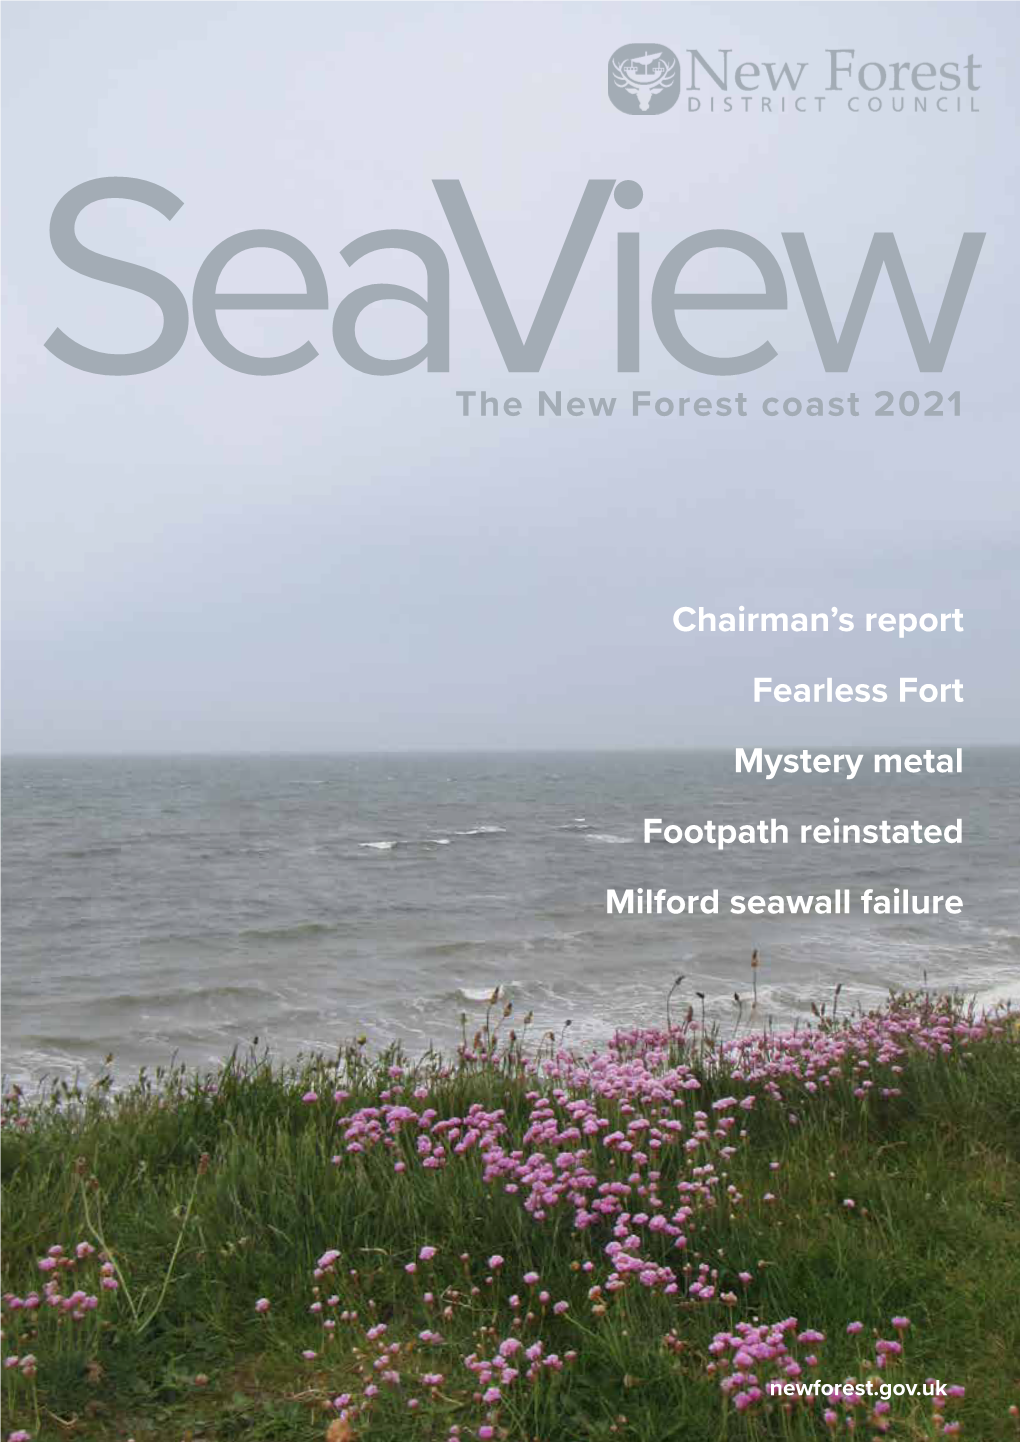 The New Forest Coast 2021